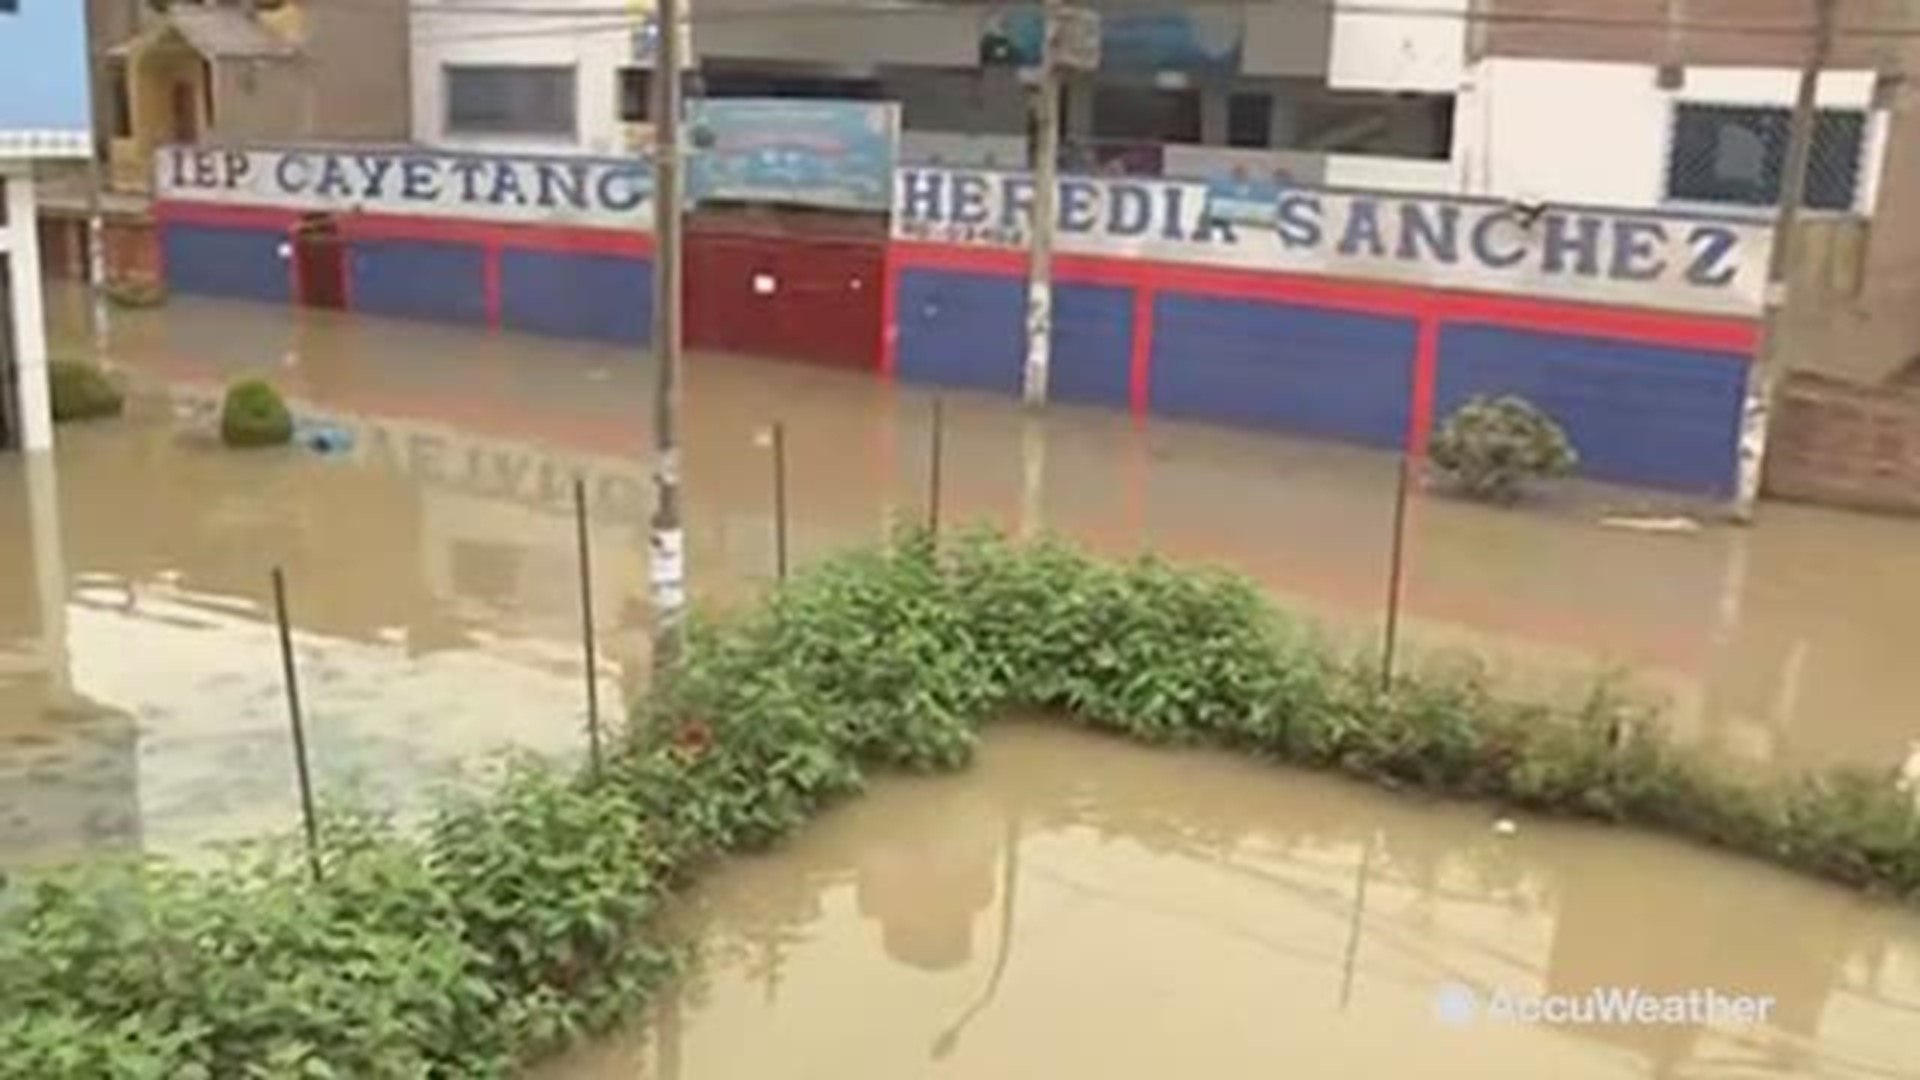 Parts of Lima, Peru, were under water on Jan. 14, after a sewage line broke, flooding parts of the city with several feet of water.